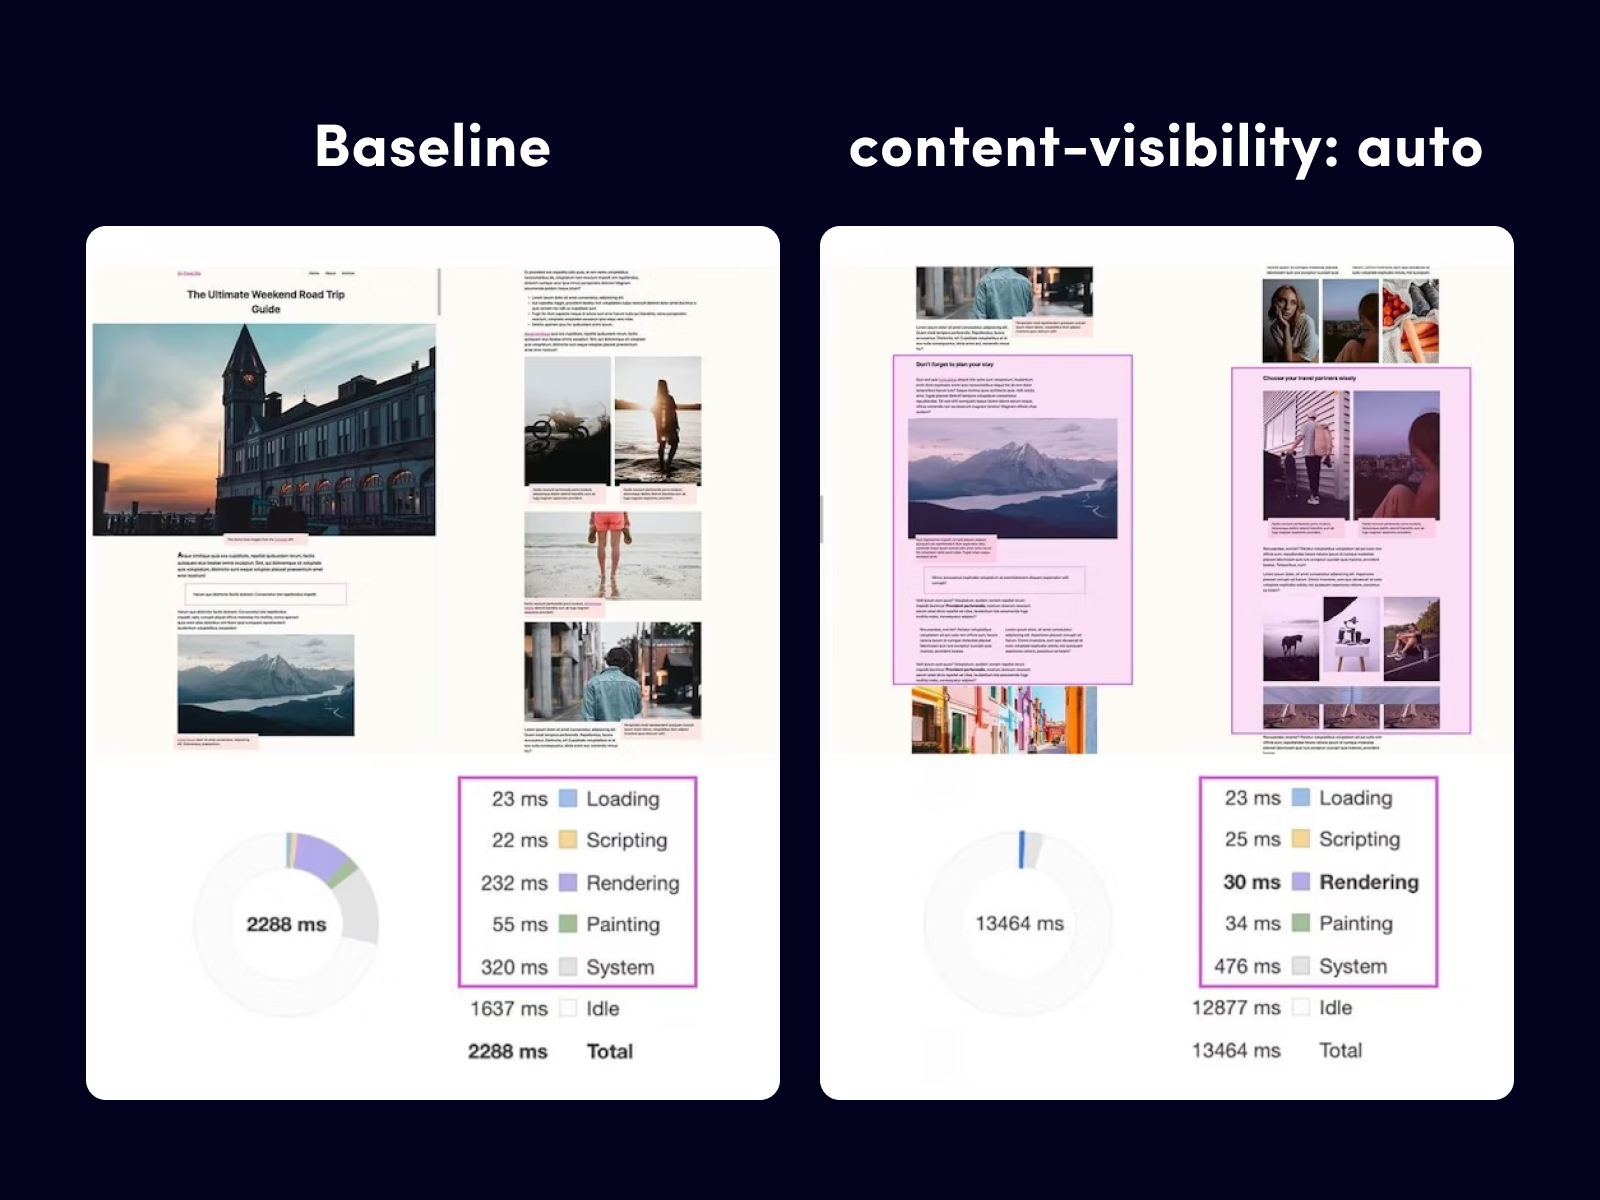 Developers demonstrated how the content-visibility: auto property applied to partitioned content increased rendering speed by a factor of 7 — from 232 ms to 30 ms